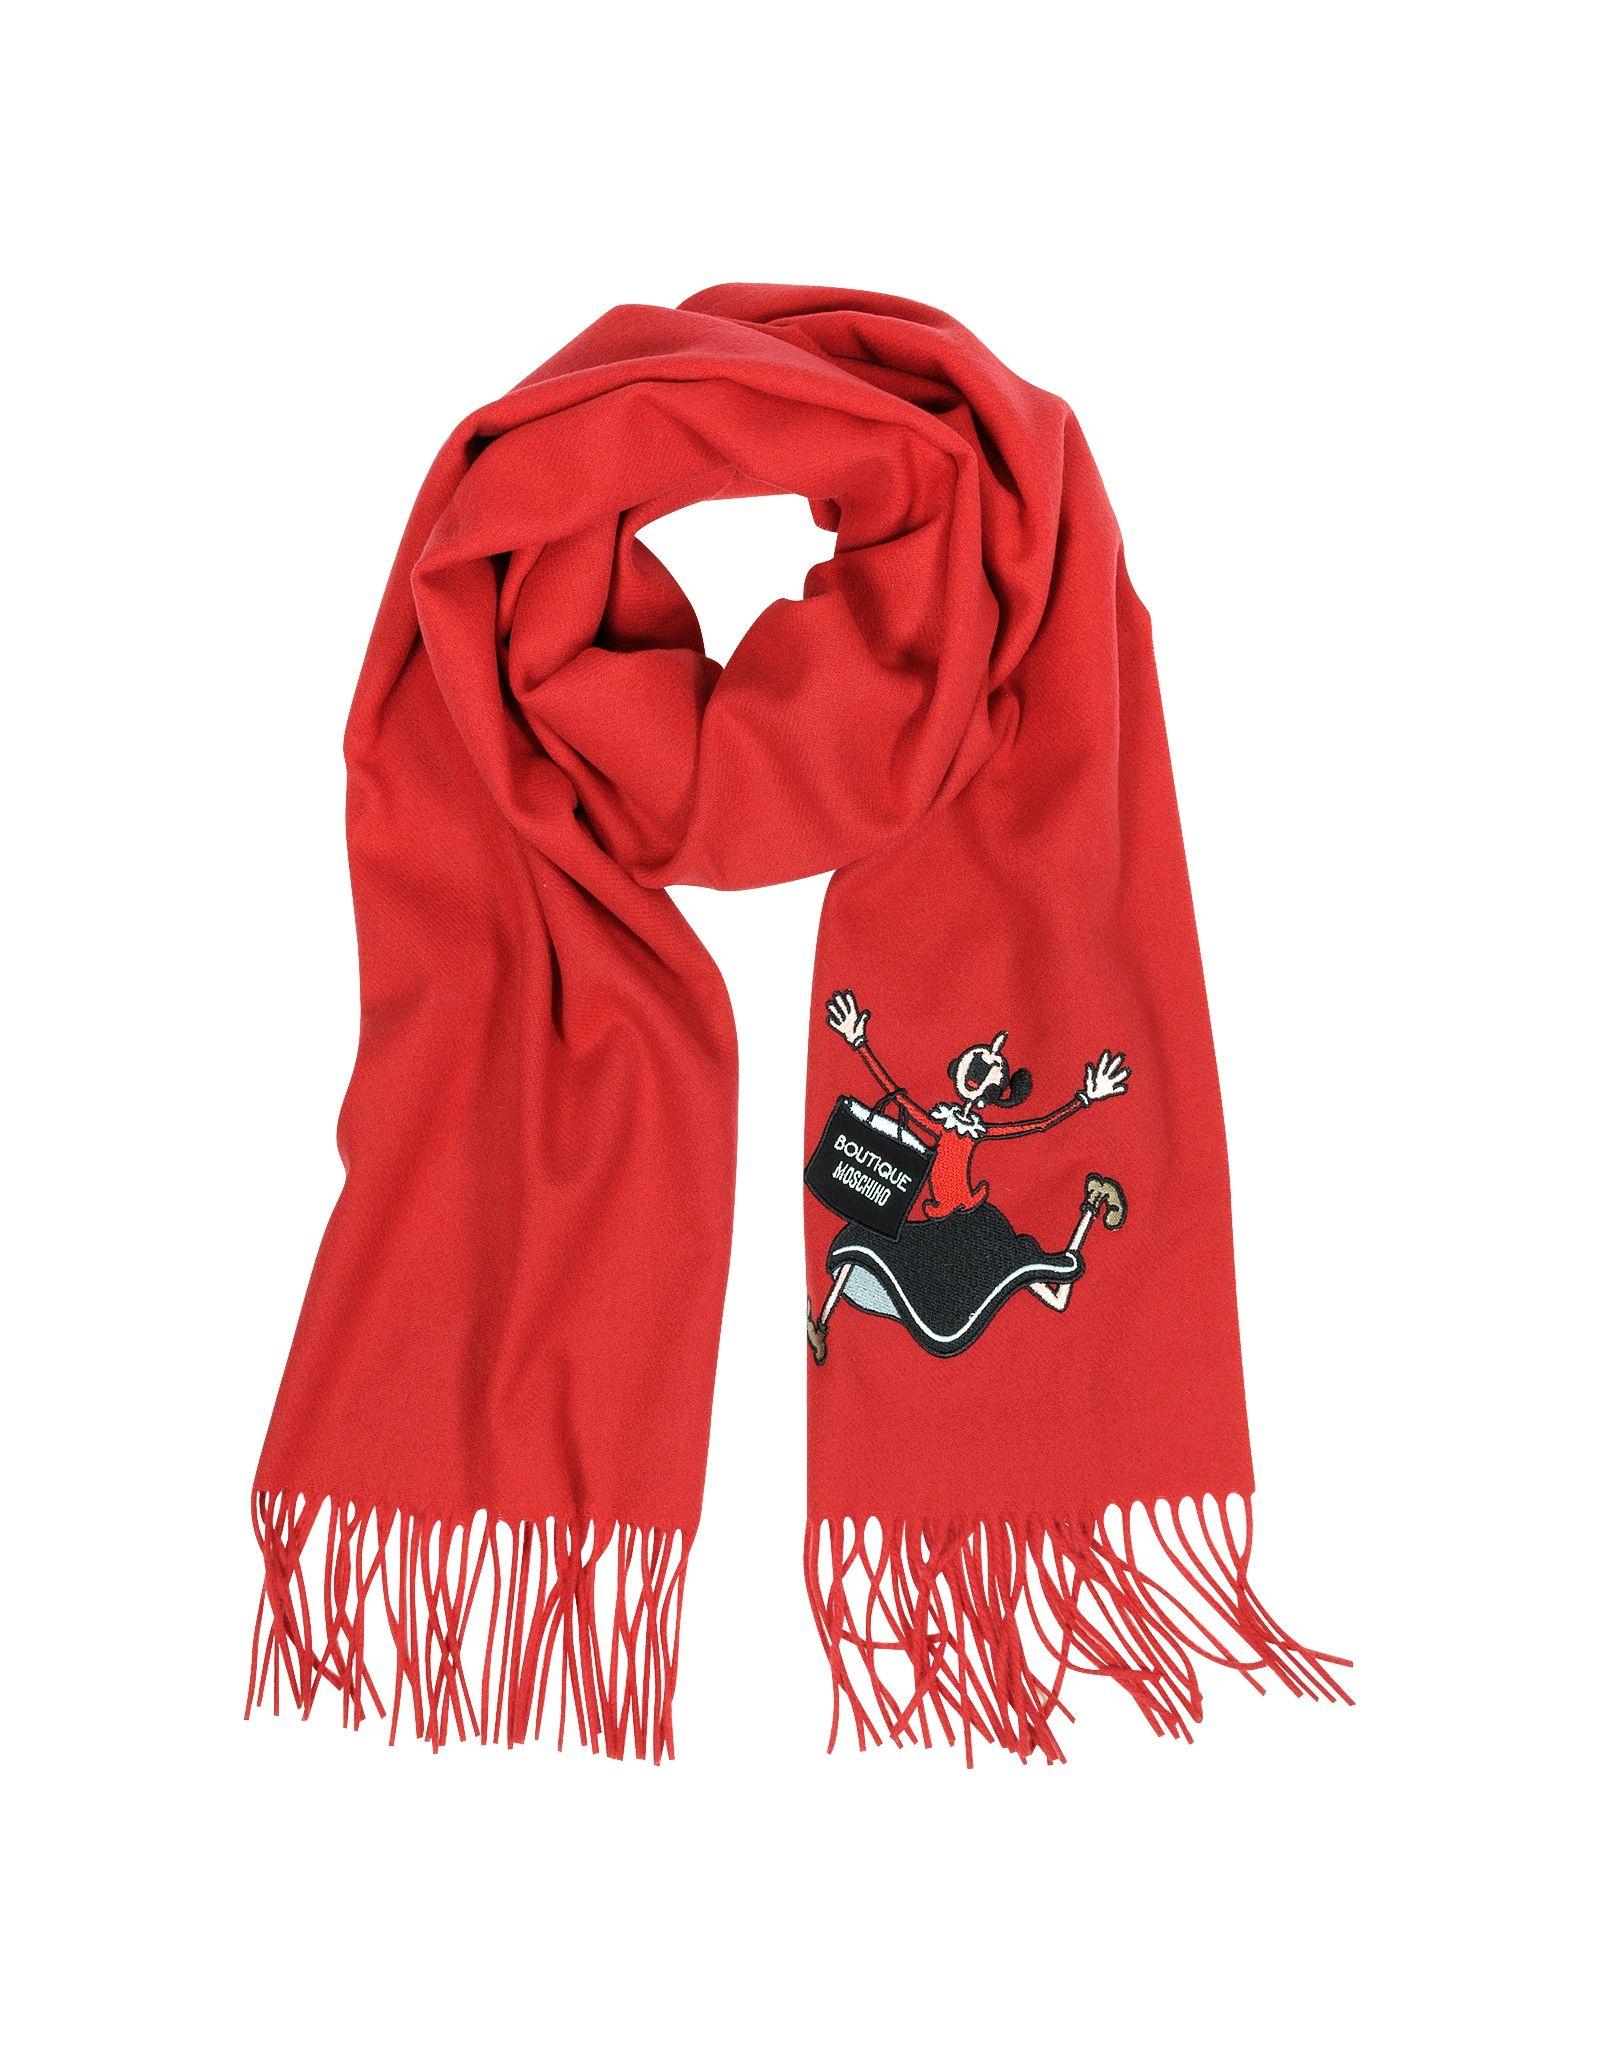 Red Boutique Logo - Moschino Boutique Olive Embroidery Wool Scarf in Red - Lyst